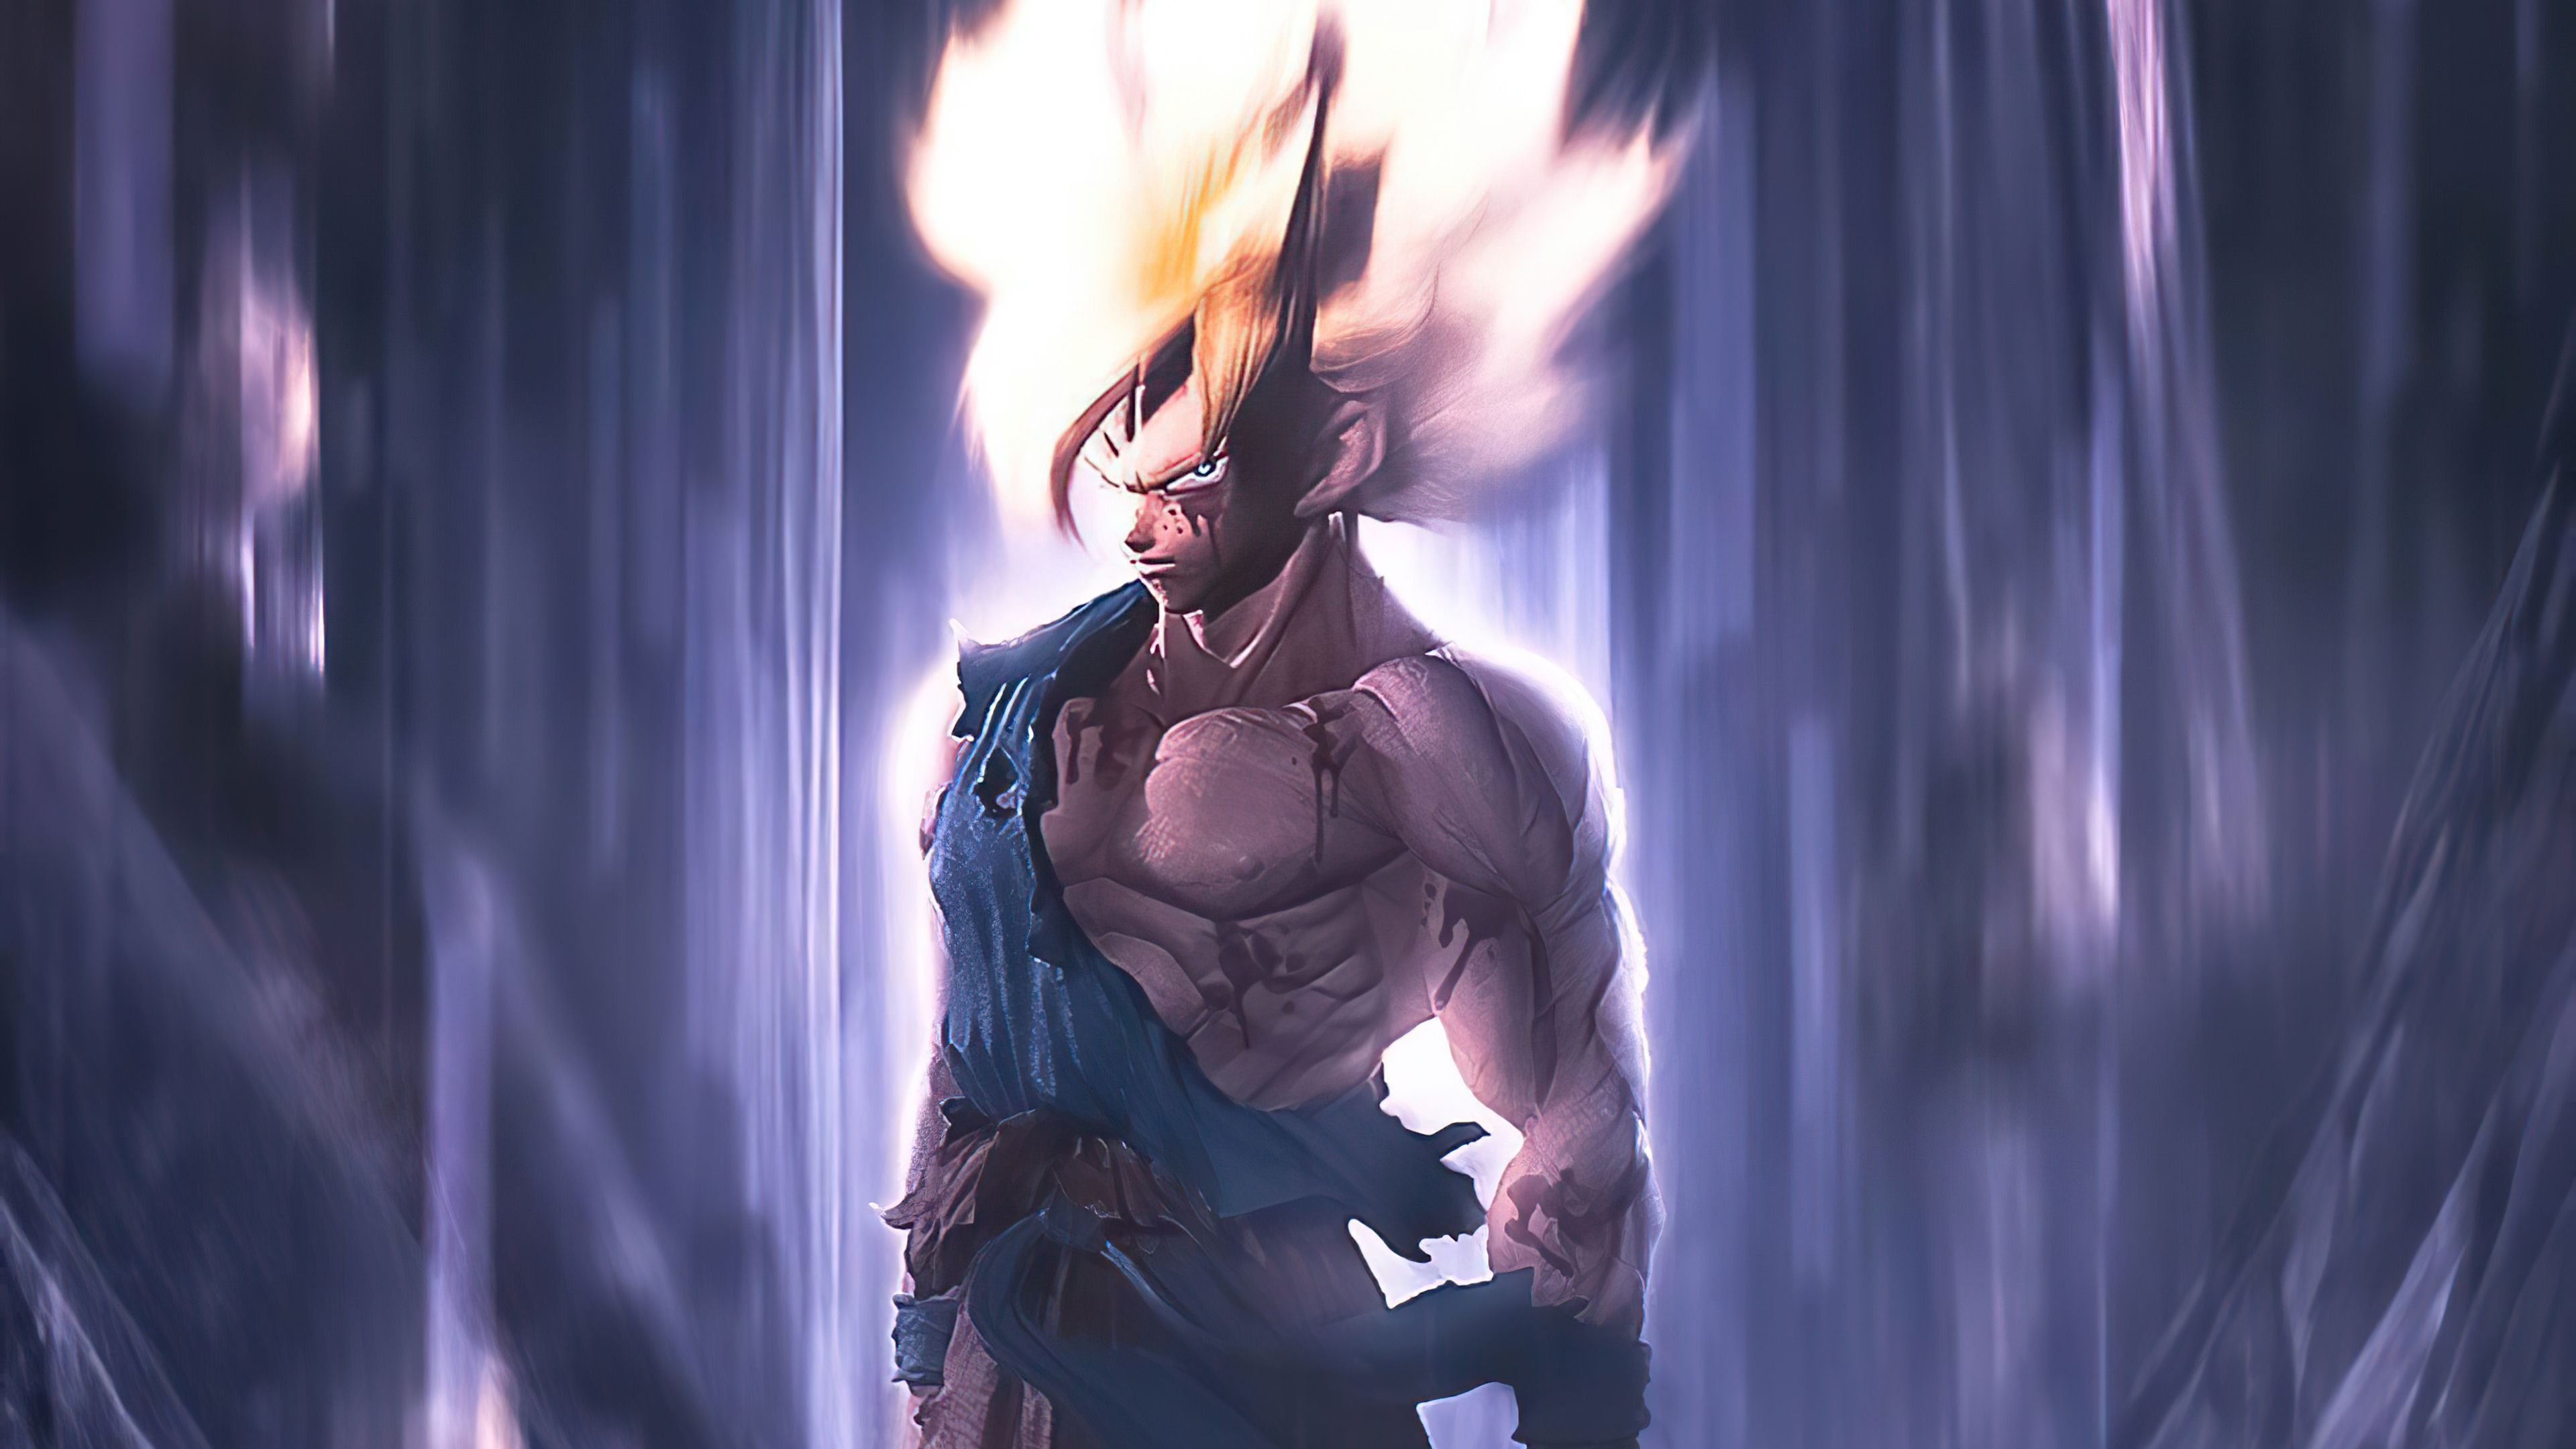 2020 Goku 4k Artwork, HD Superheroes, 4k Wallpapers, Image, Backgrounds, Photos and Pictures